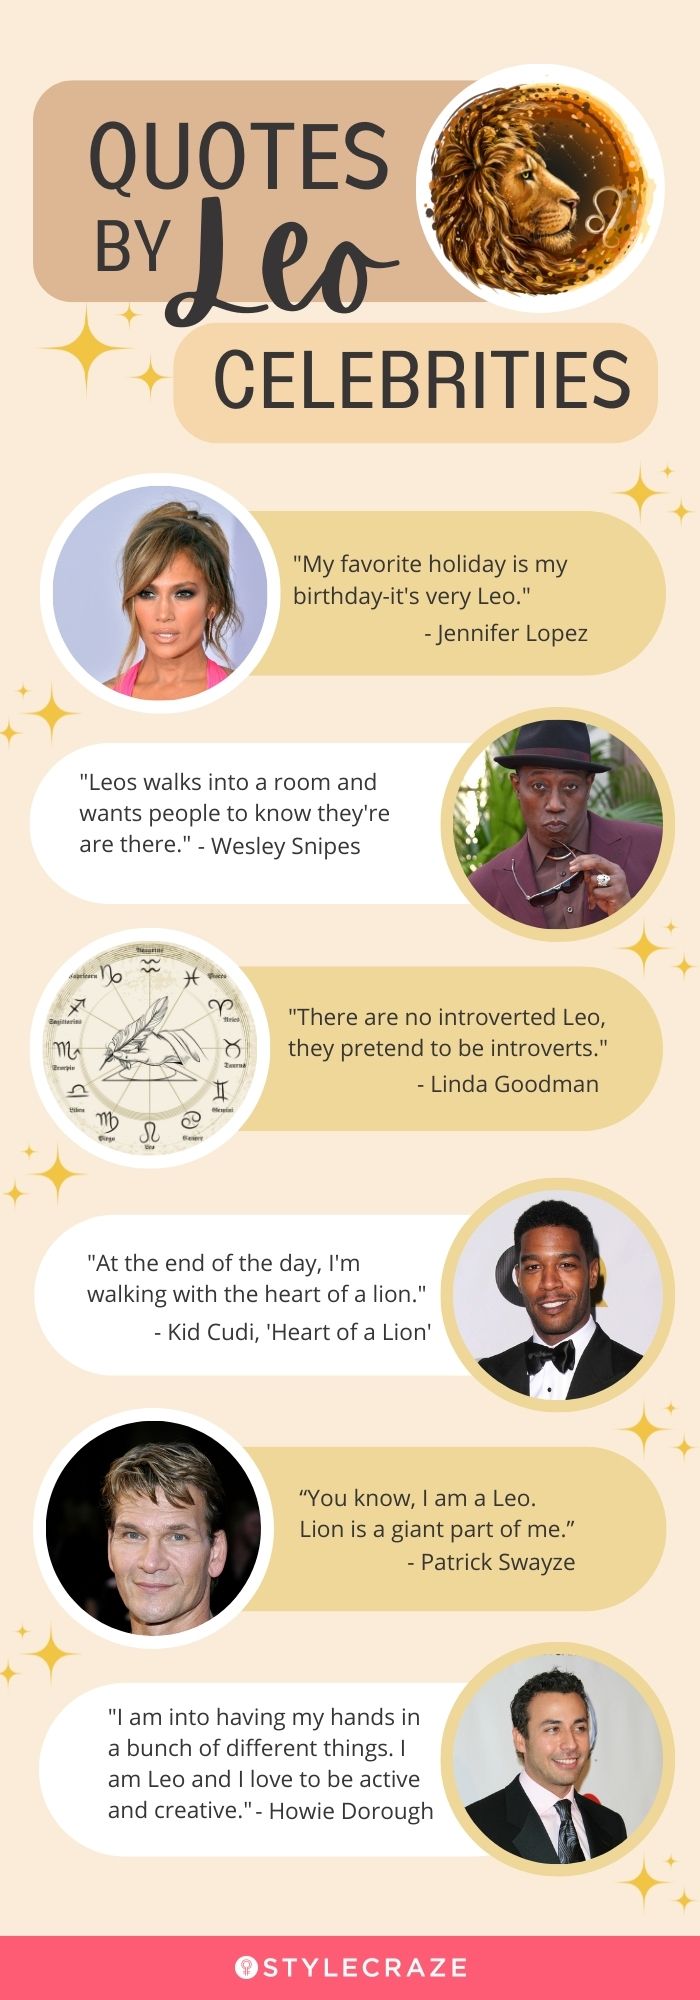 quotes by leo celebrities (infographic)